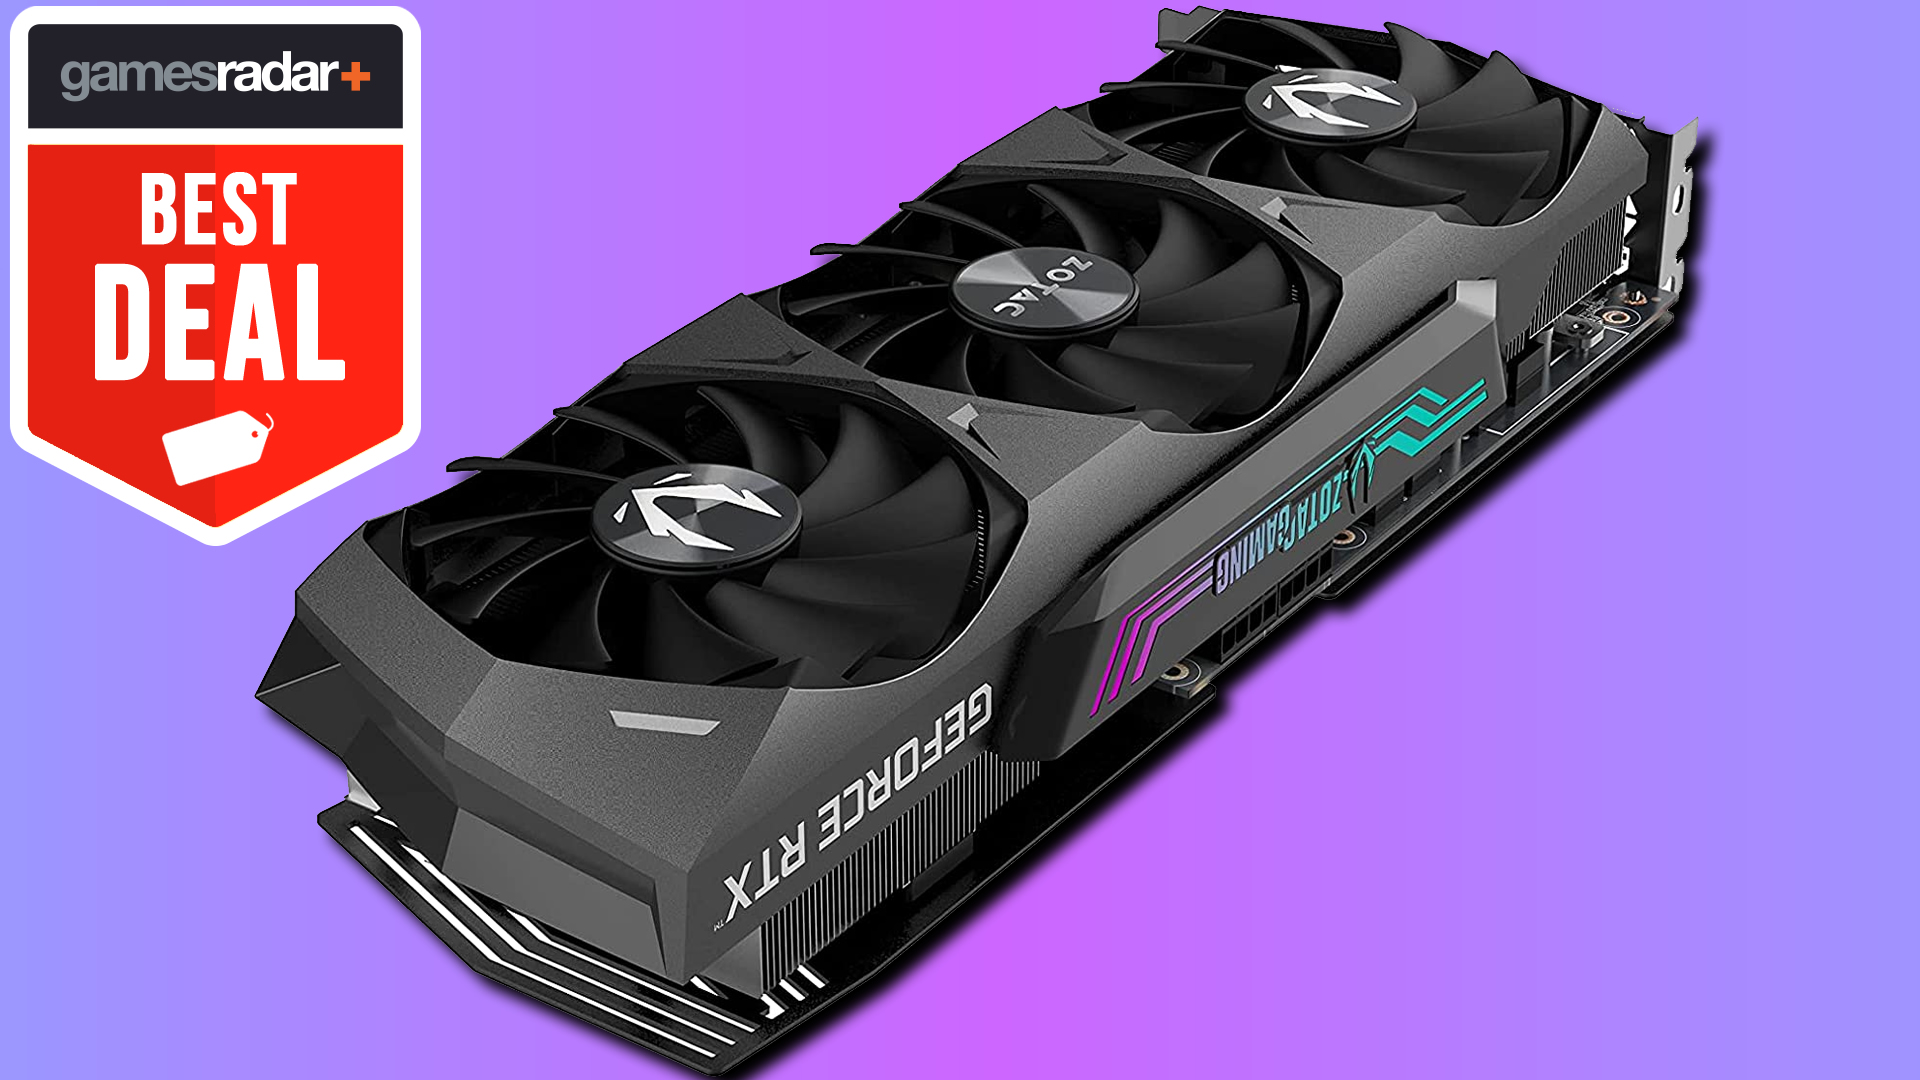 This graphics card deal sees the Zotac Gaming RTX 3070 Ti Trinity